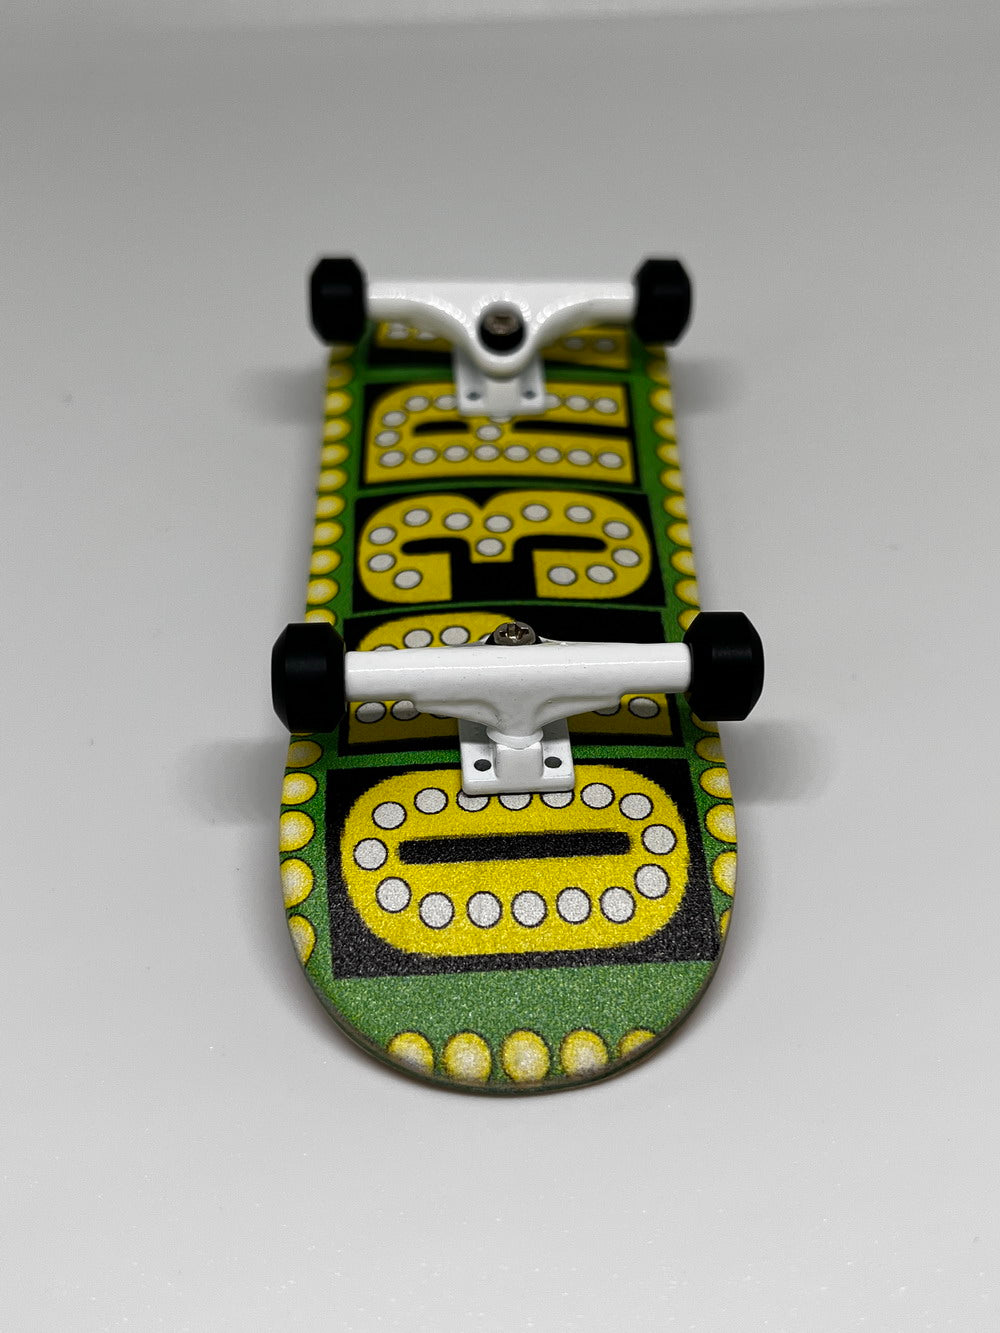 Op3ra Pro Fingerboard Complete 34 * 96mm - The Blocks (Green) Edition